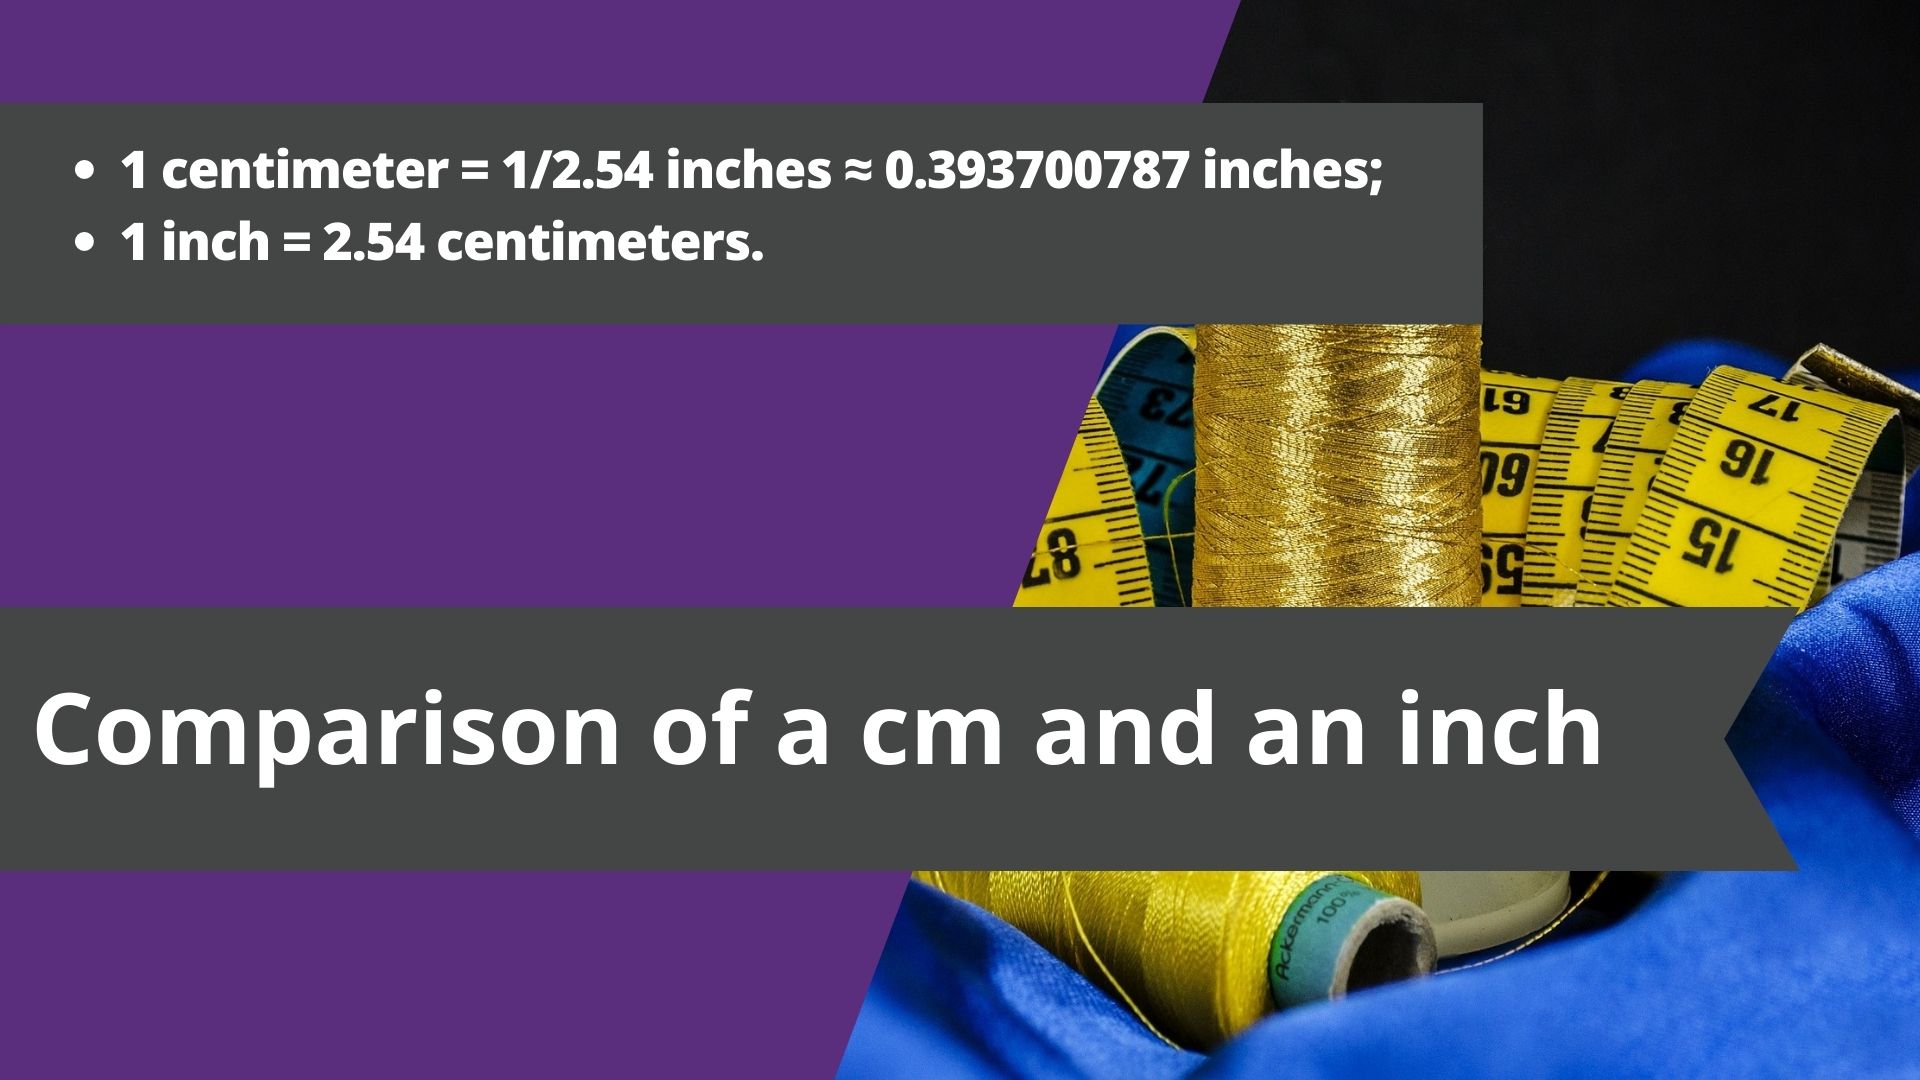 Comparison of a cm and an inch